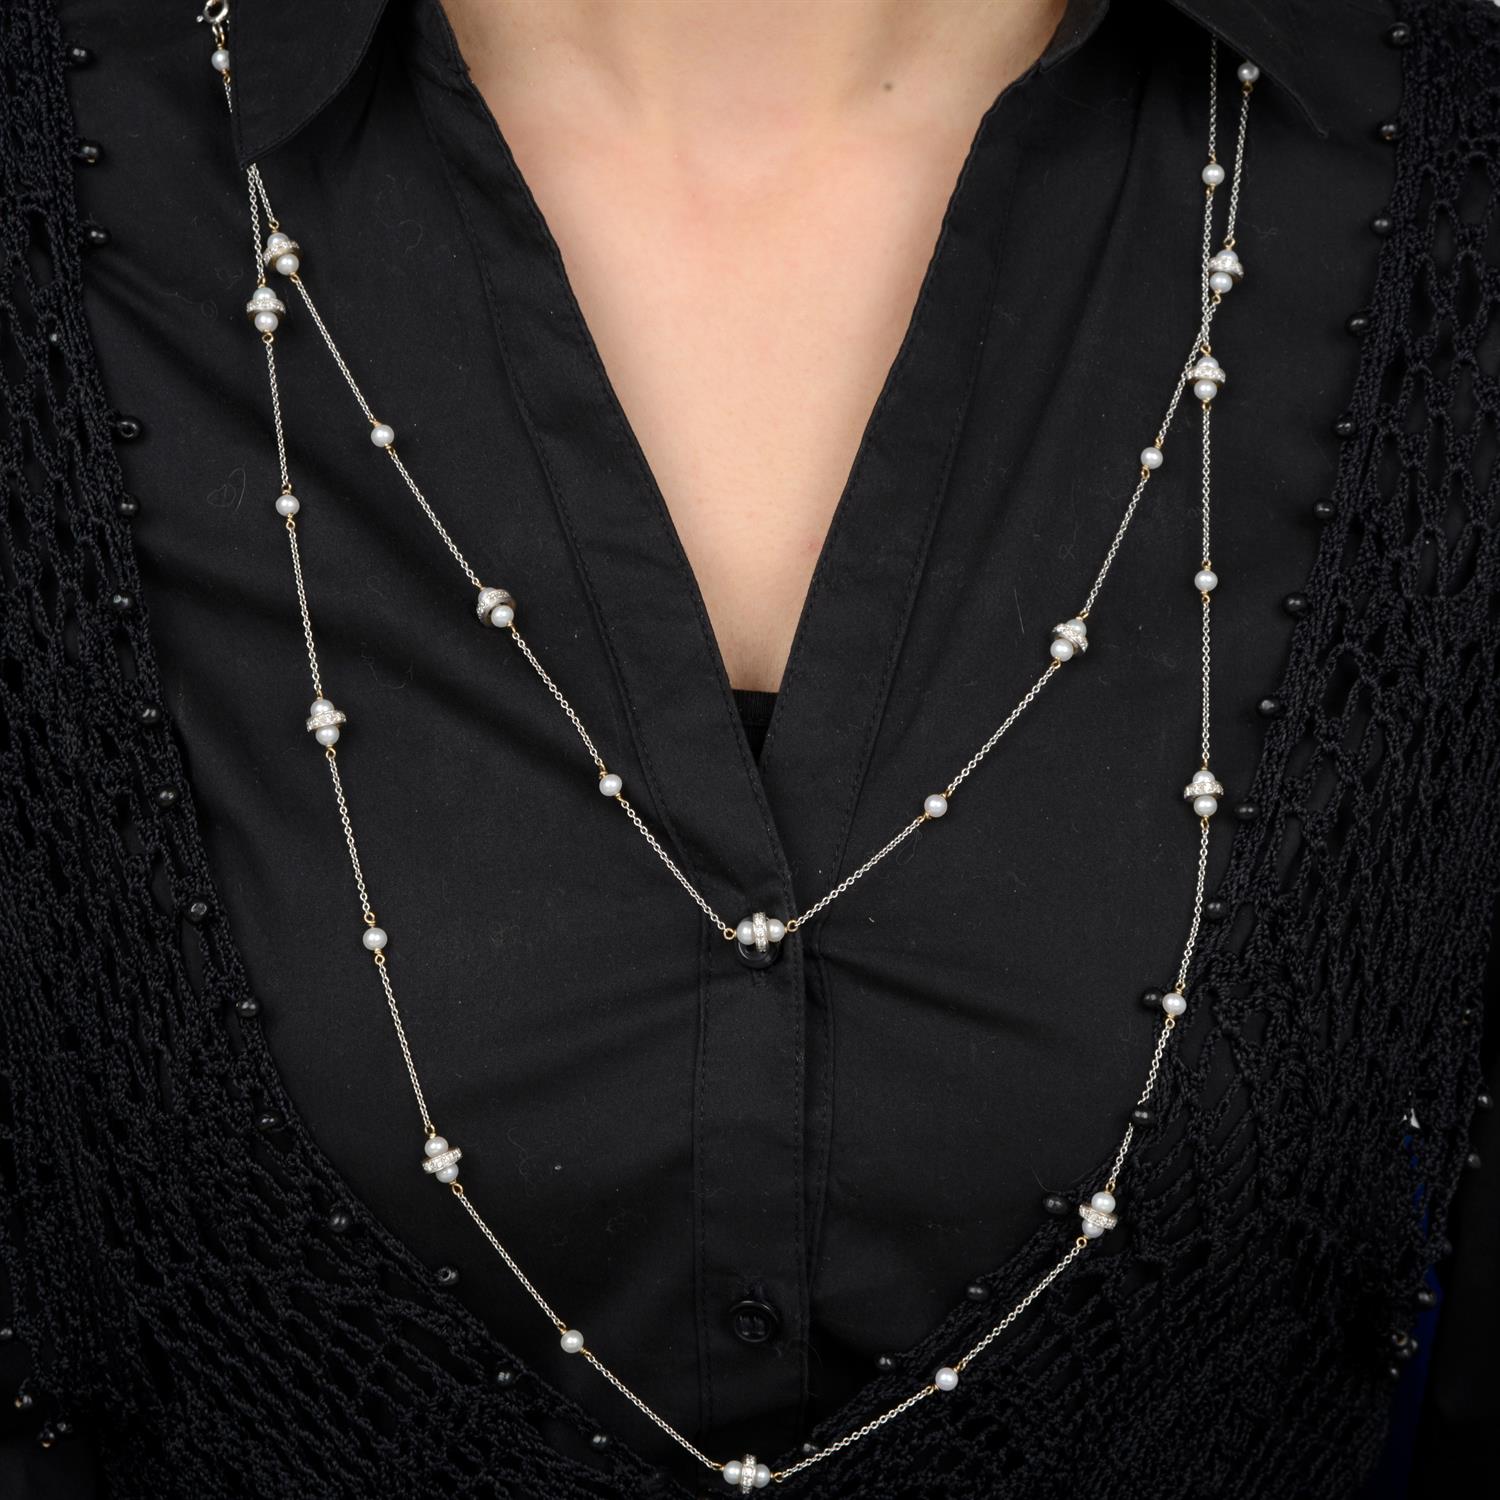 Diamond and cultured pearl necklace